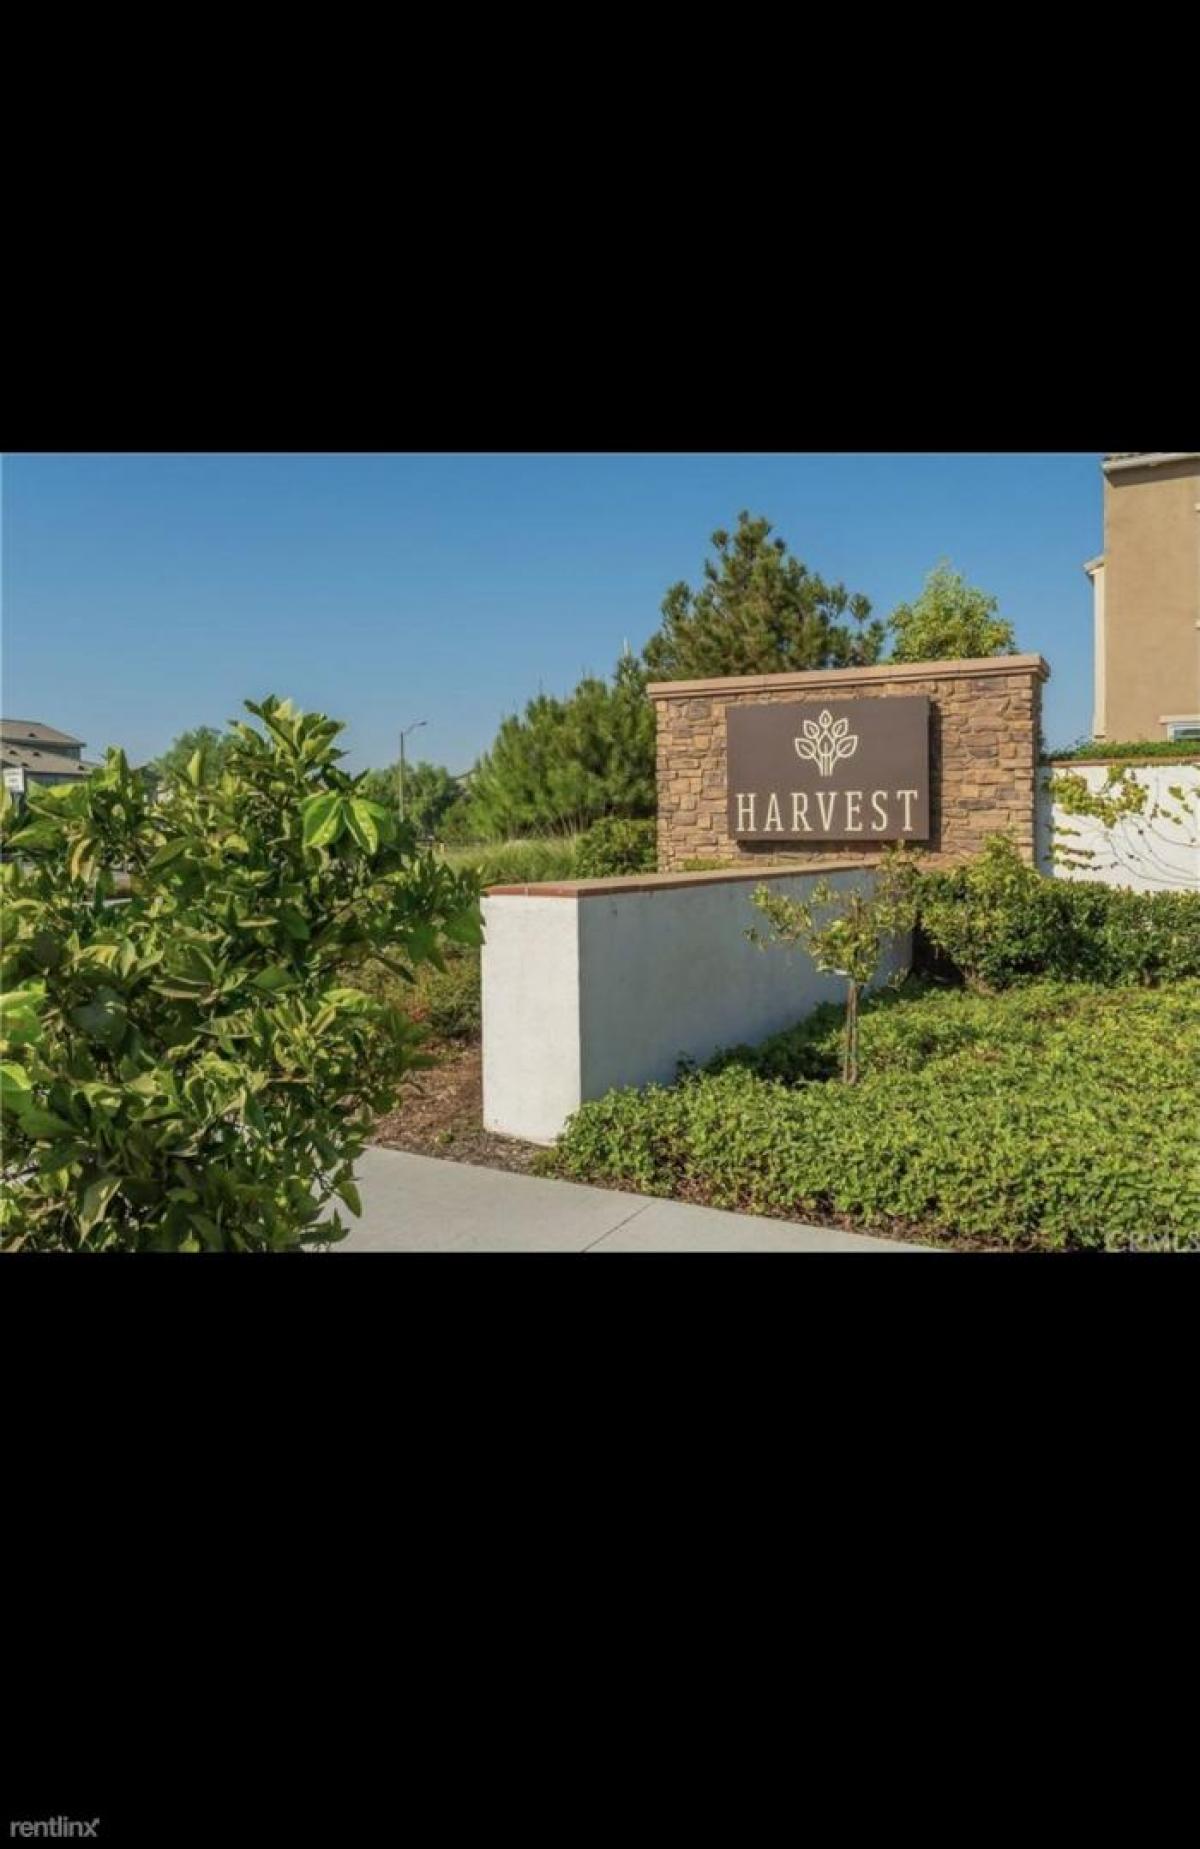 Picture of Apartment For Rent in Chino, California, United States